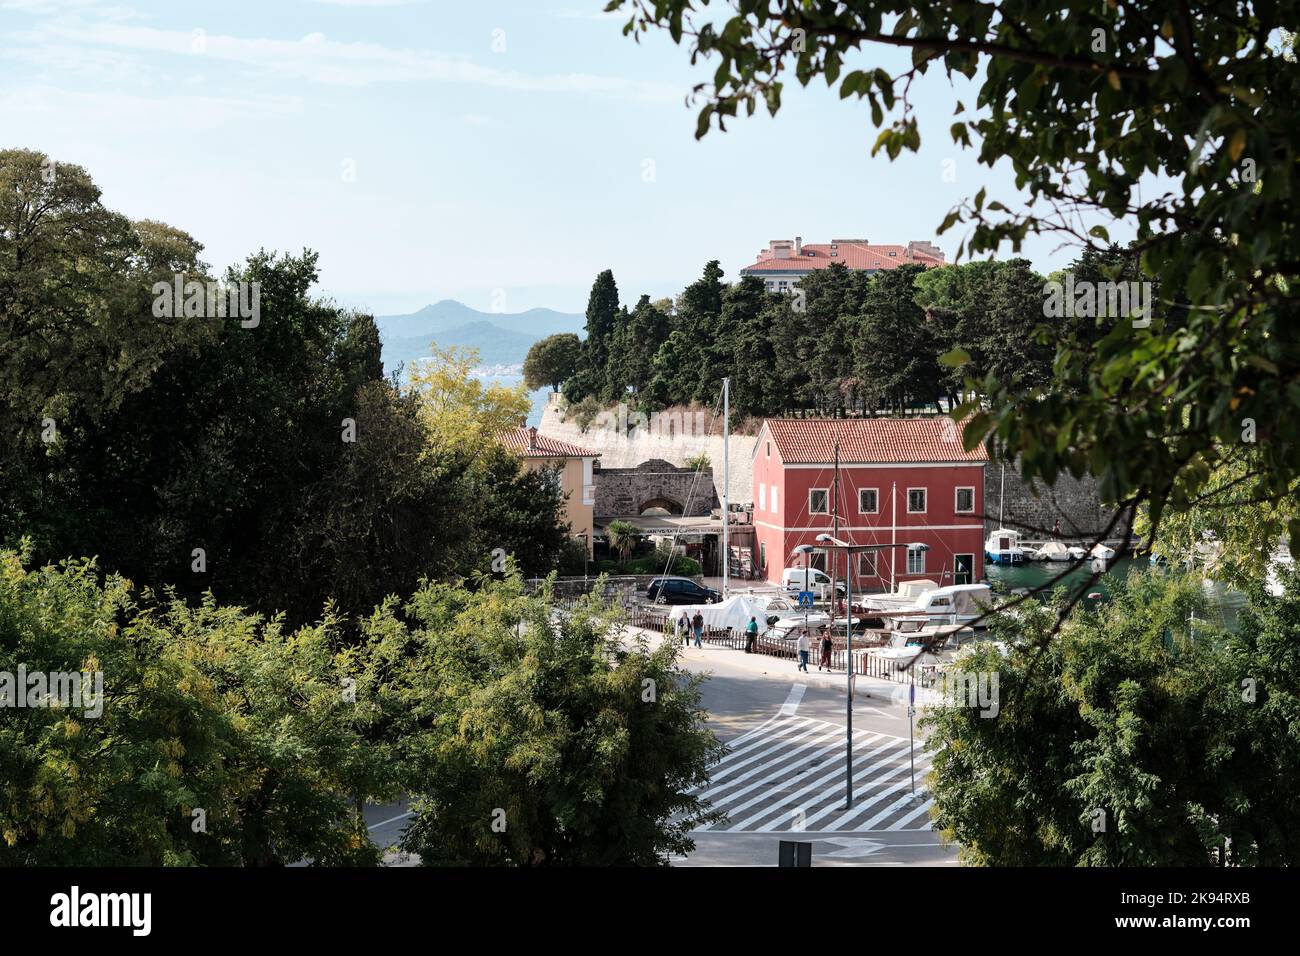 Fosa harbour by the Venetian Land gate in the city walls of Old Zadar, Croatia housing the Fosa seafood restaurant from on top of the medeval walls Stock Photo